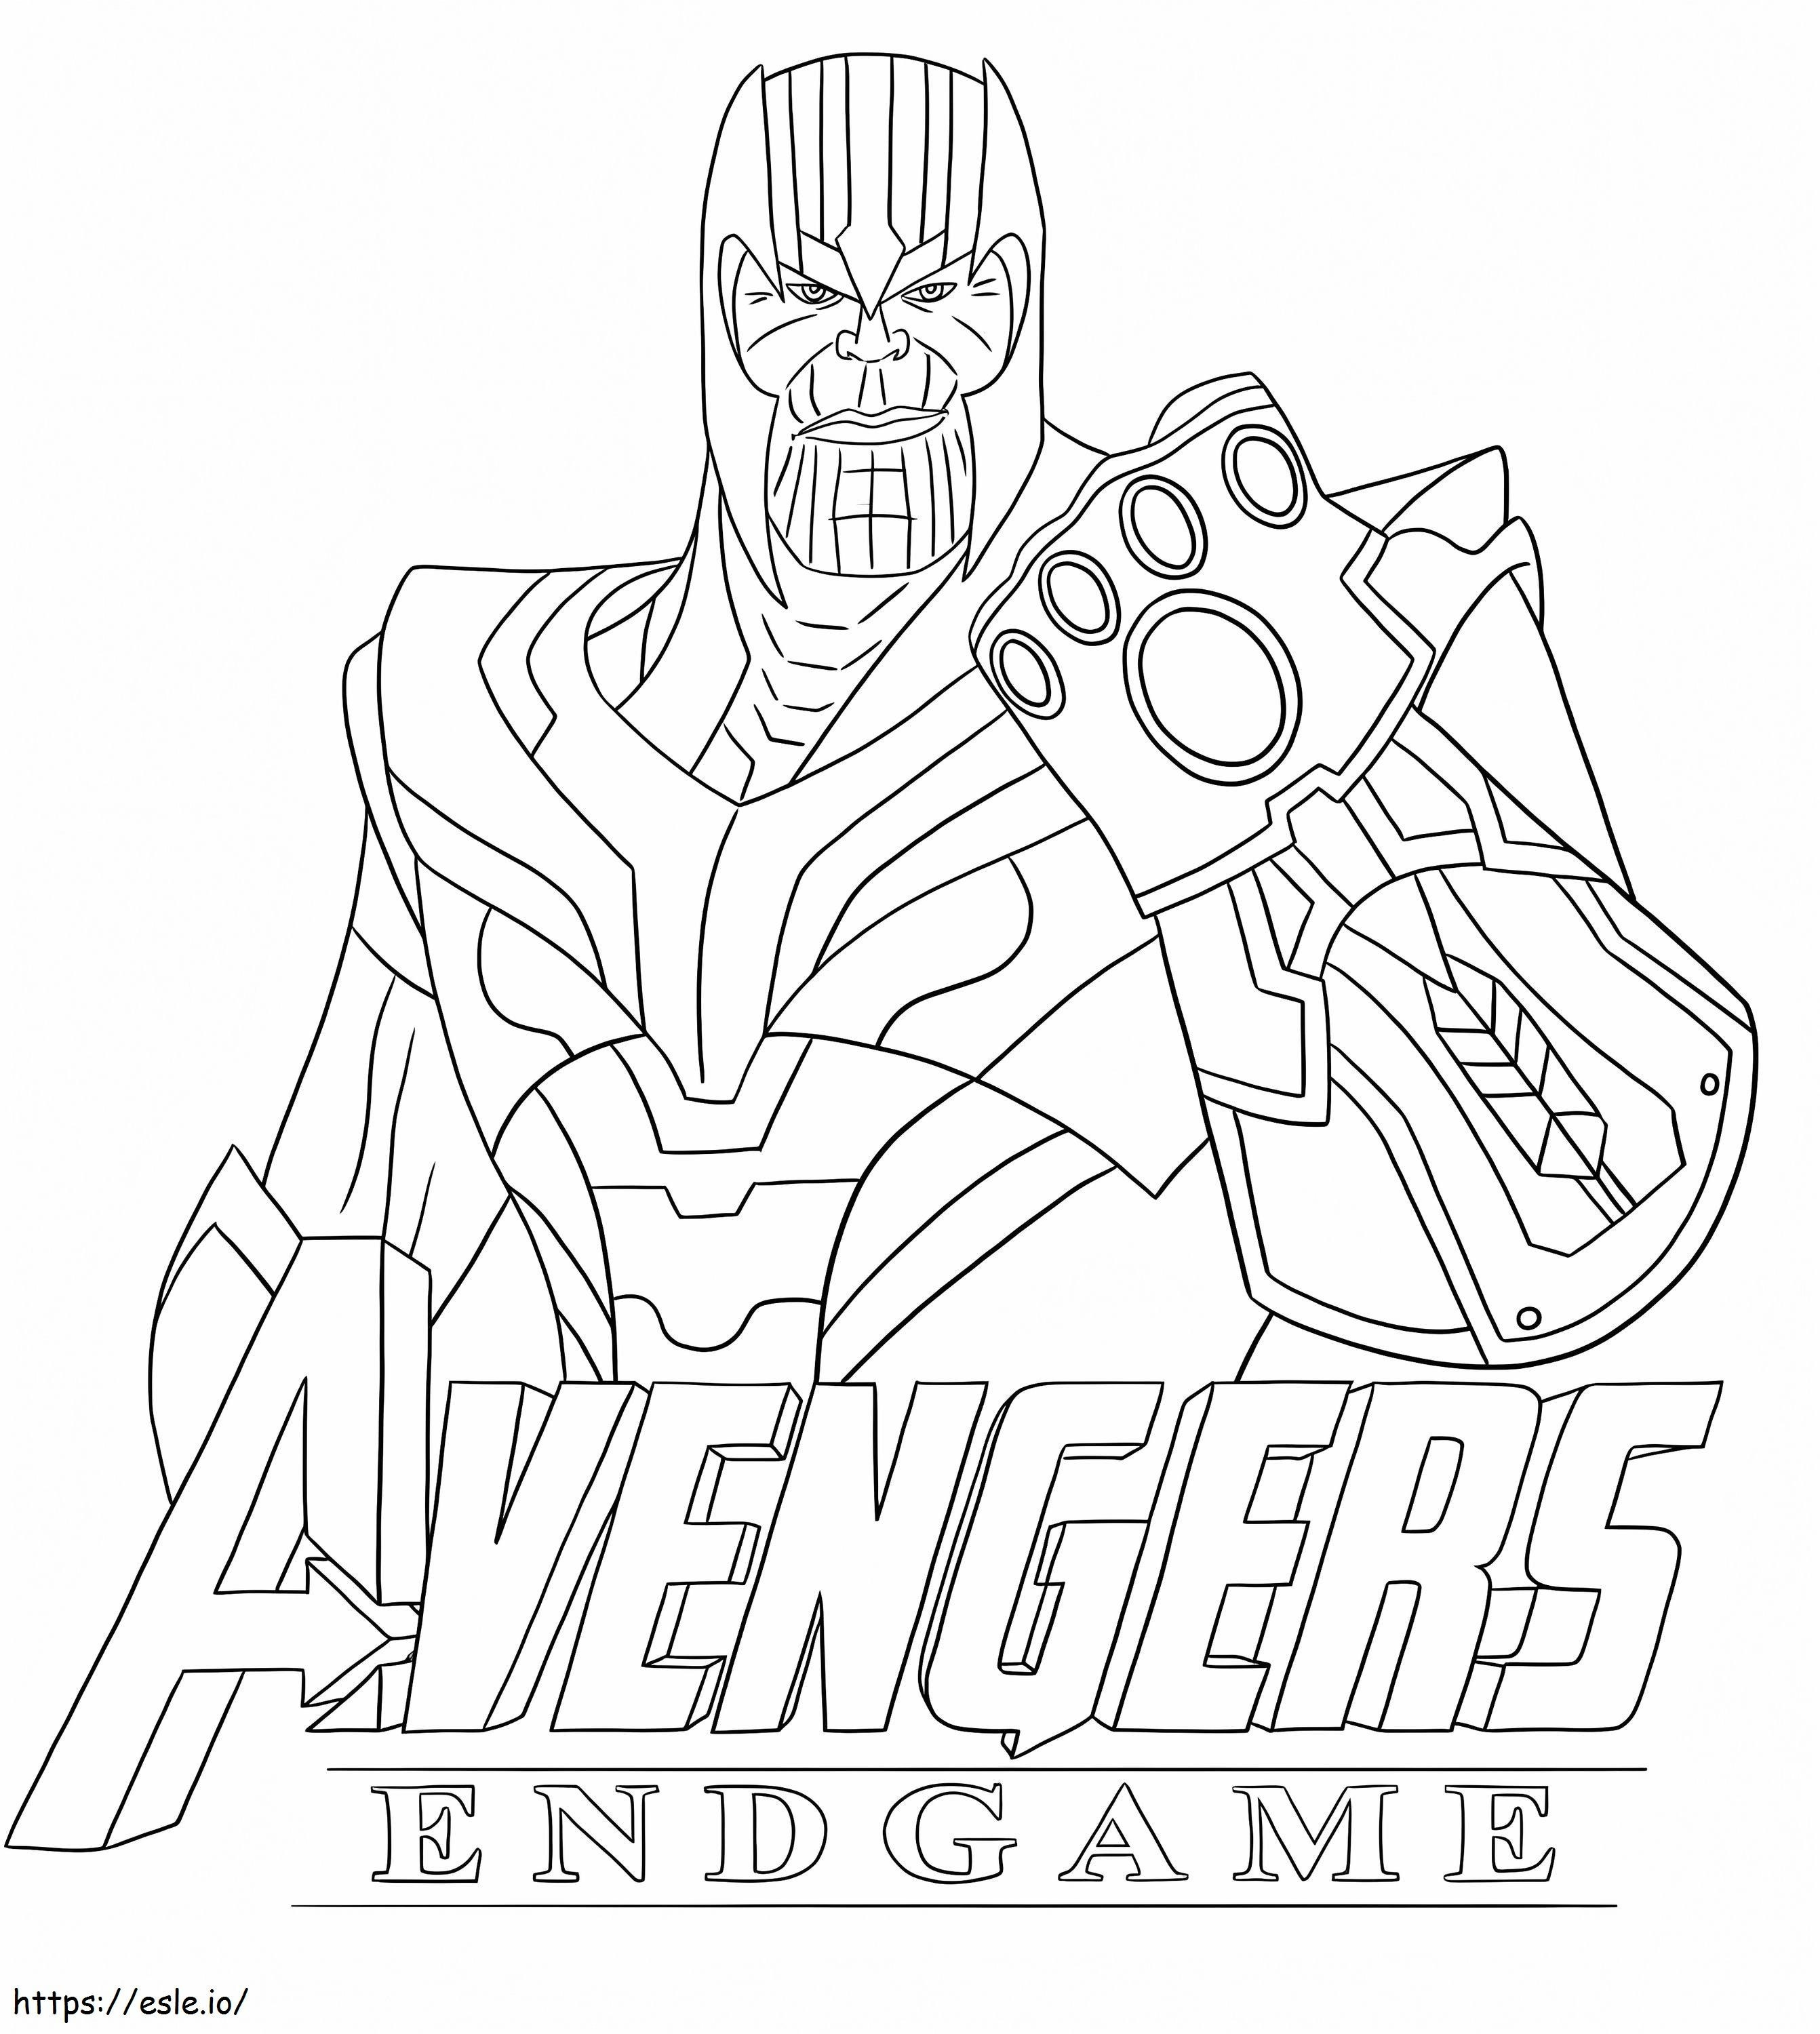 Thanos From Endgame coloring page